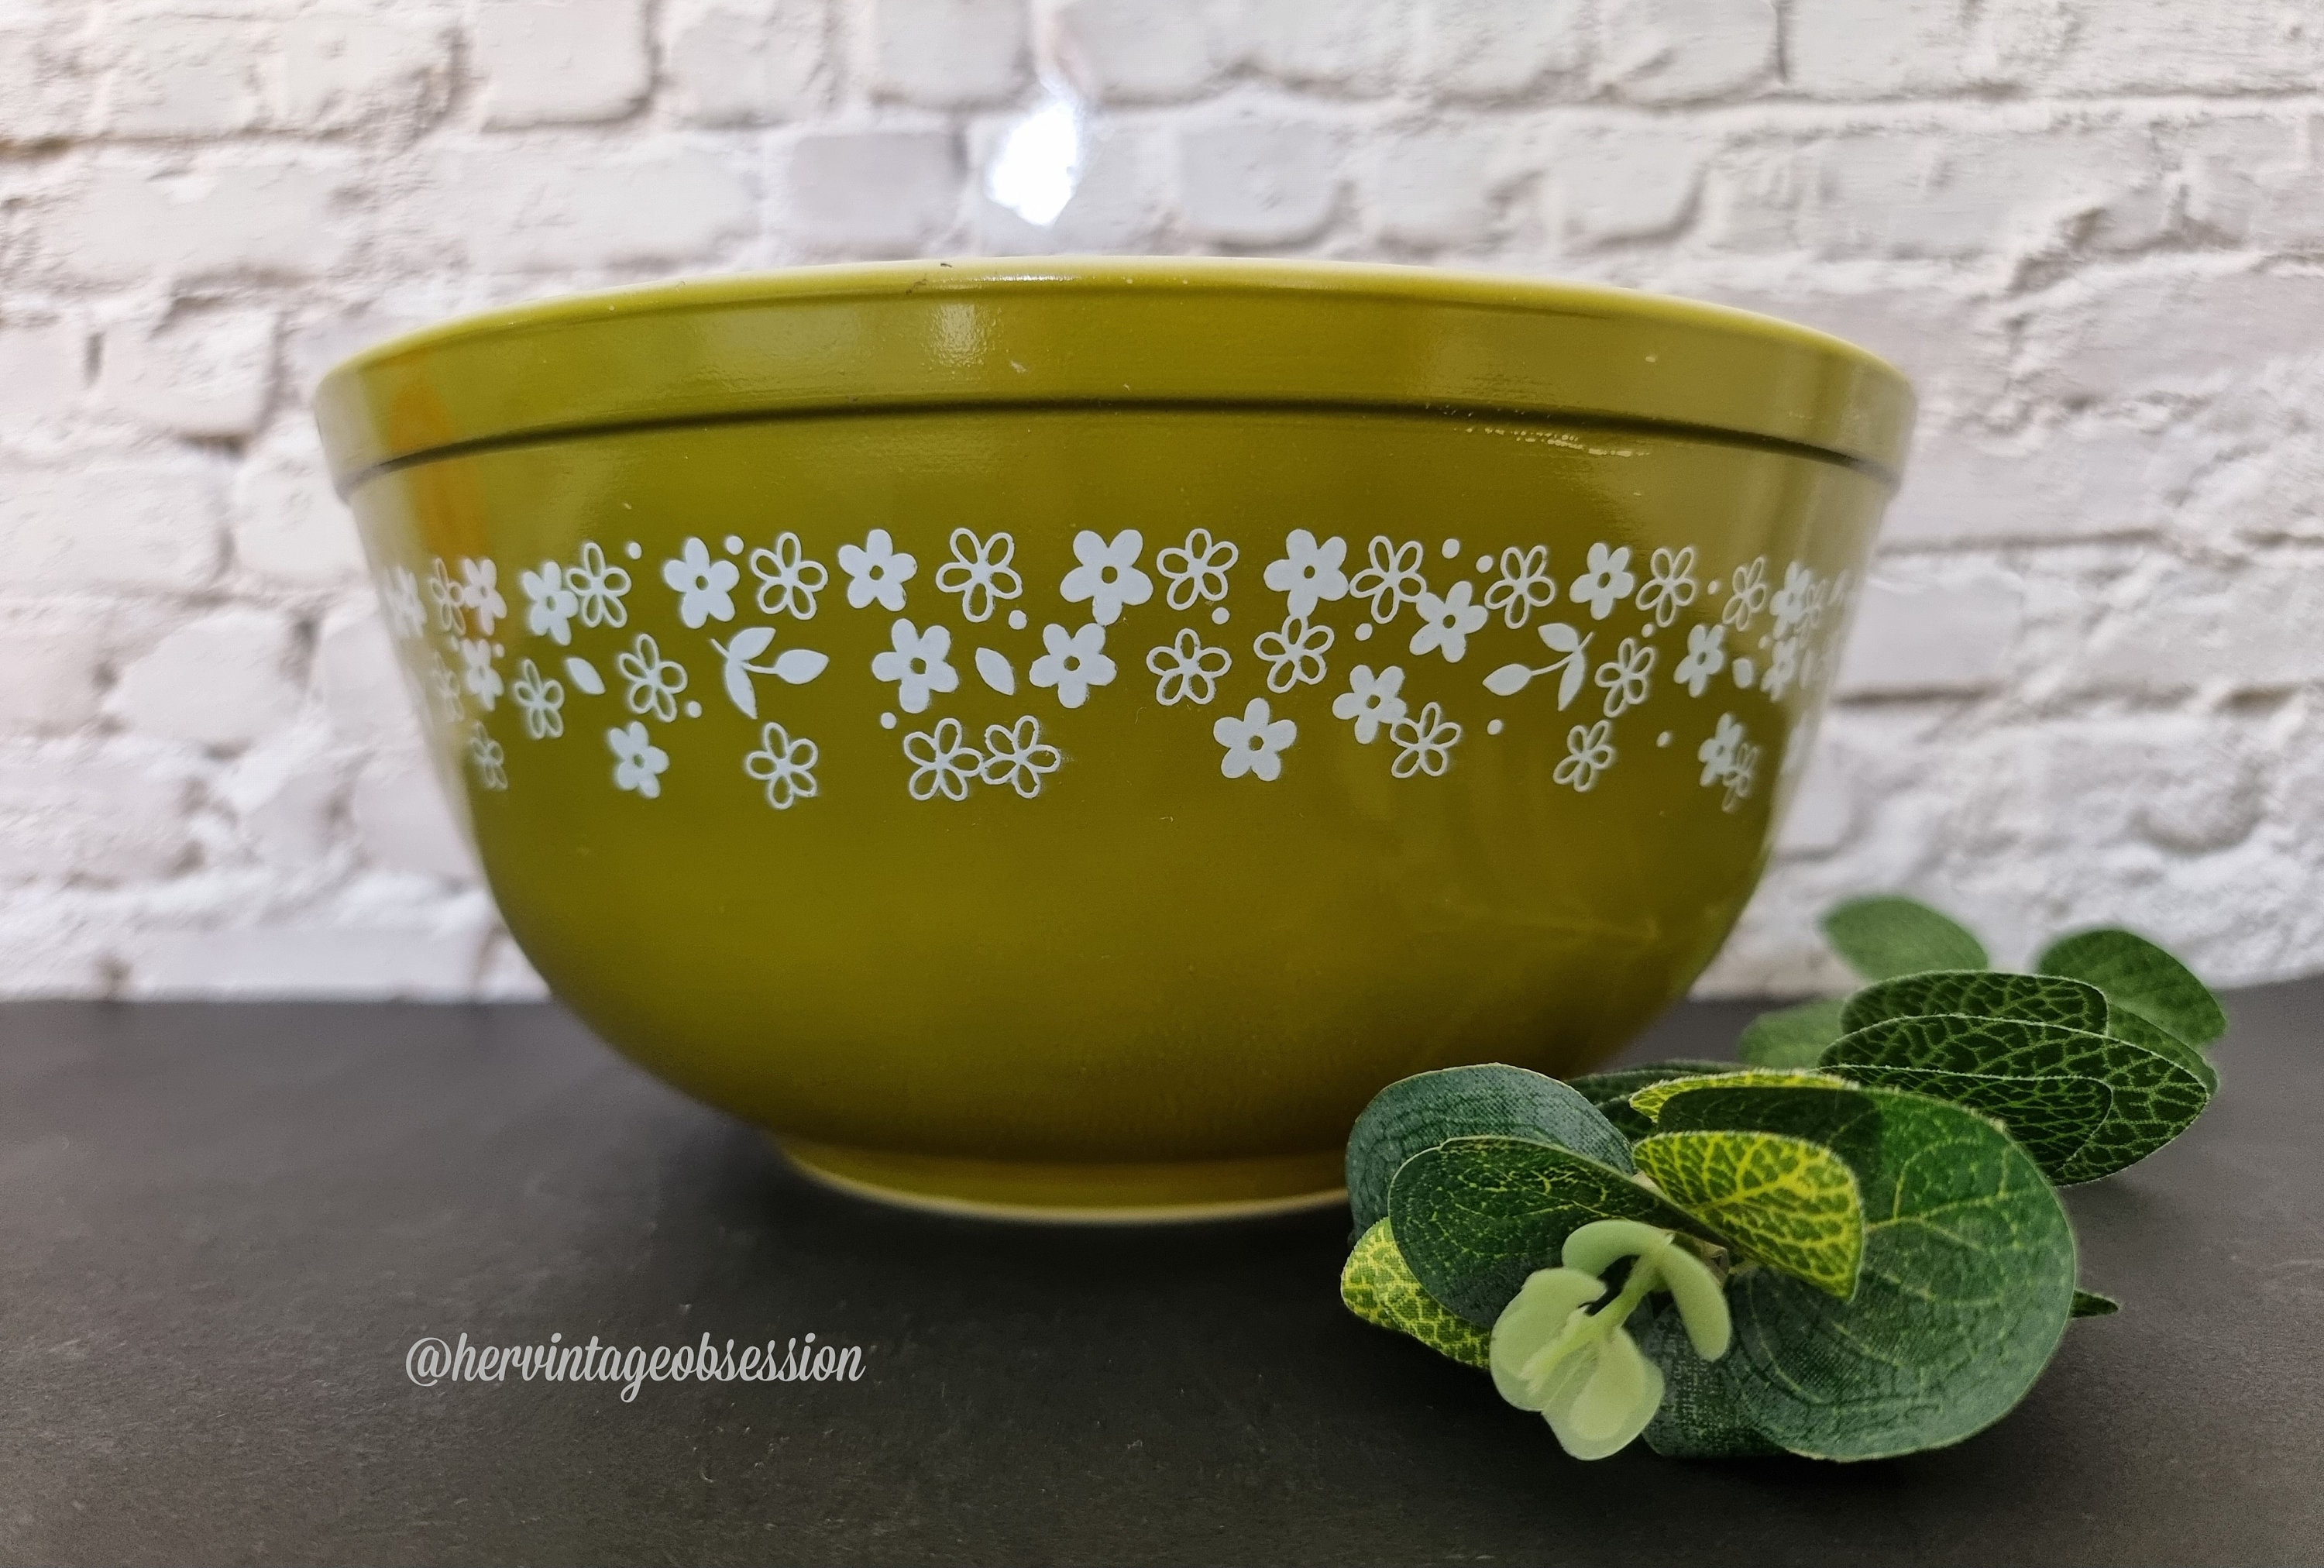 4-Quart Pyrex Mixing Bowl - The Clever Carrot